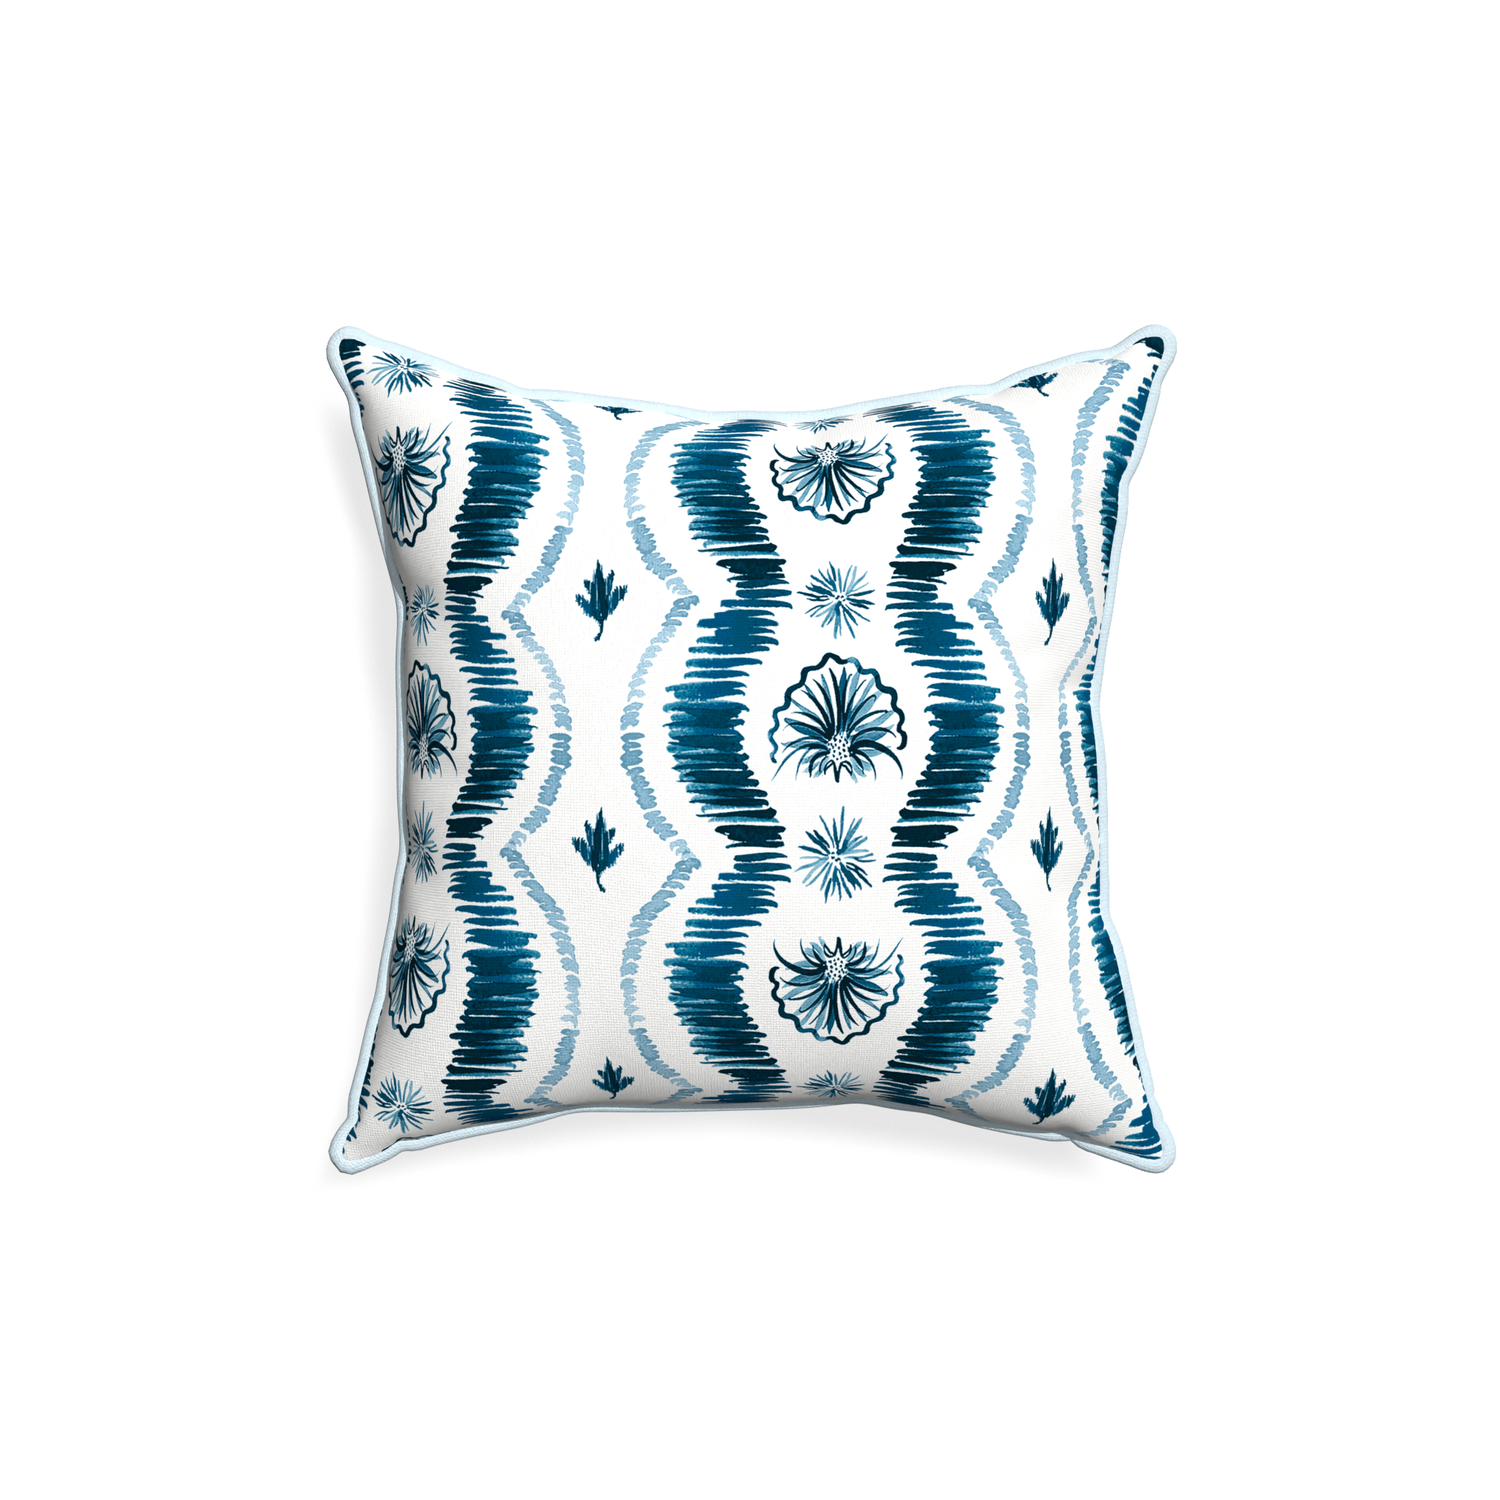 18-square alice custom blue ikatpillow with powder piping on white background